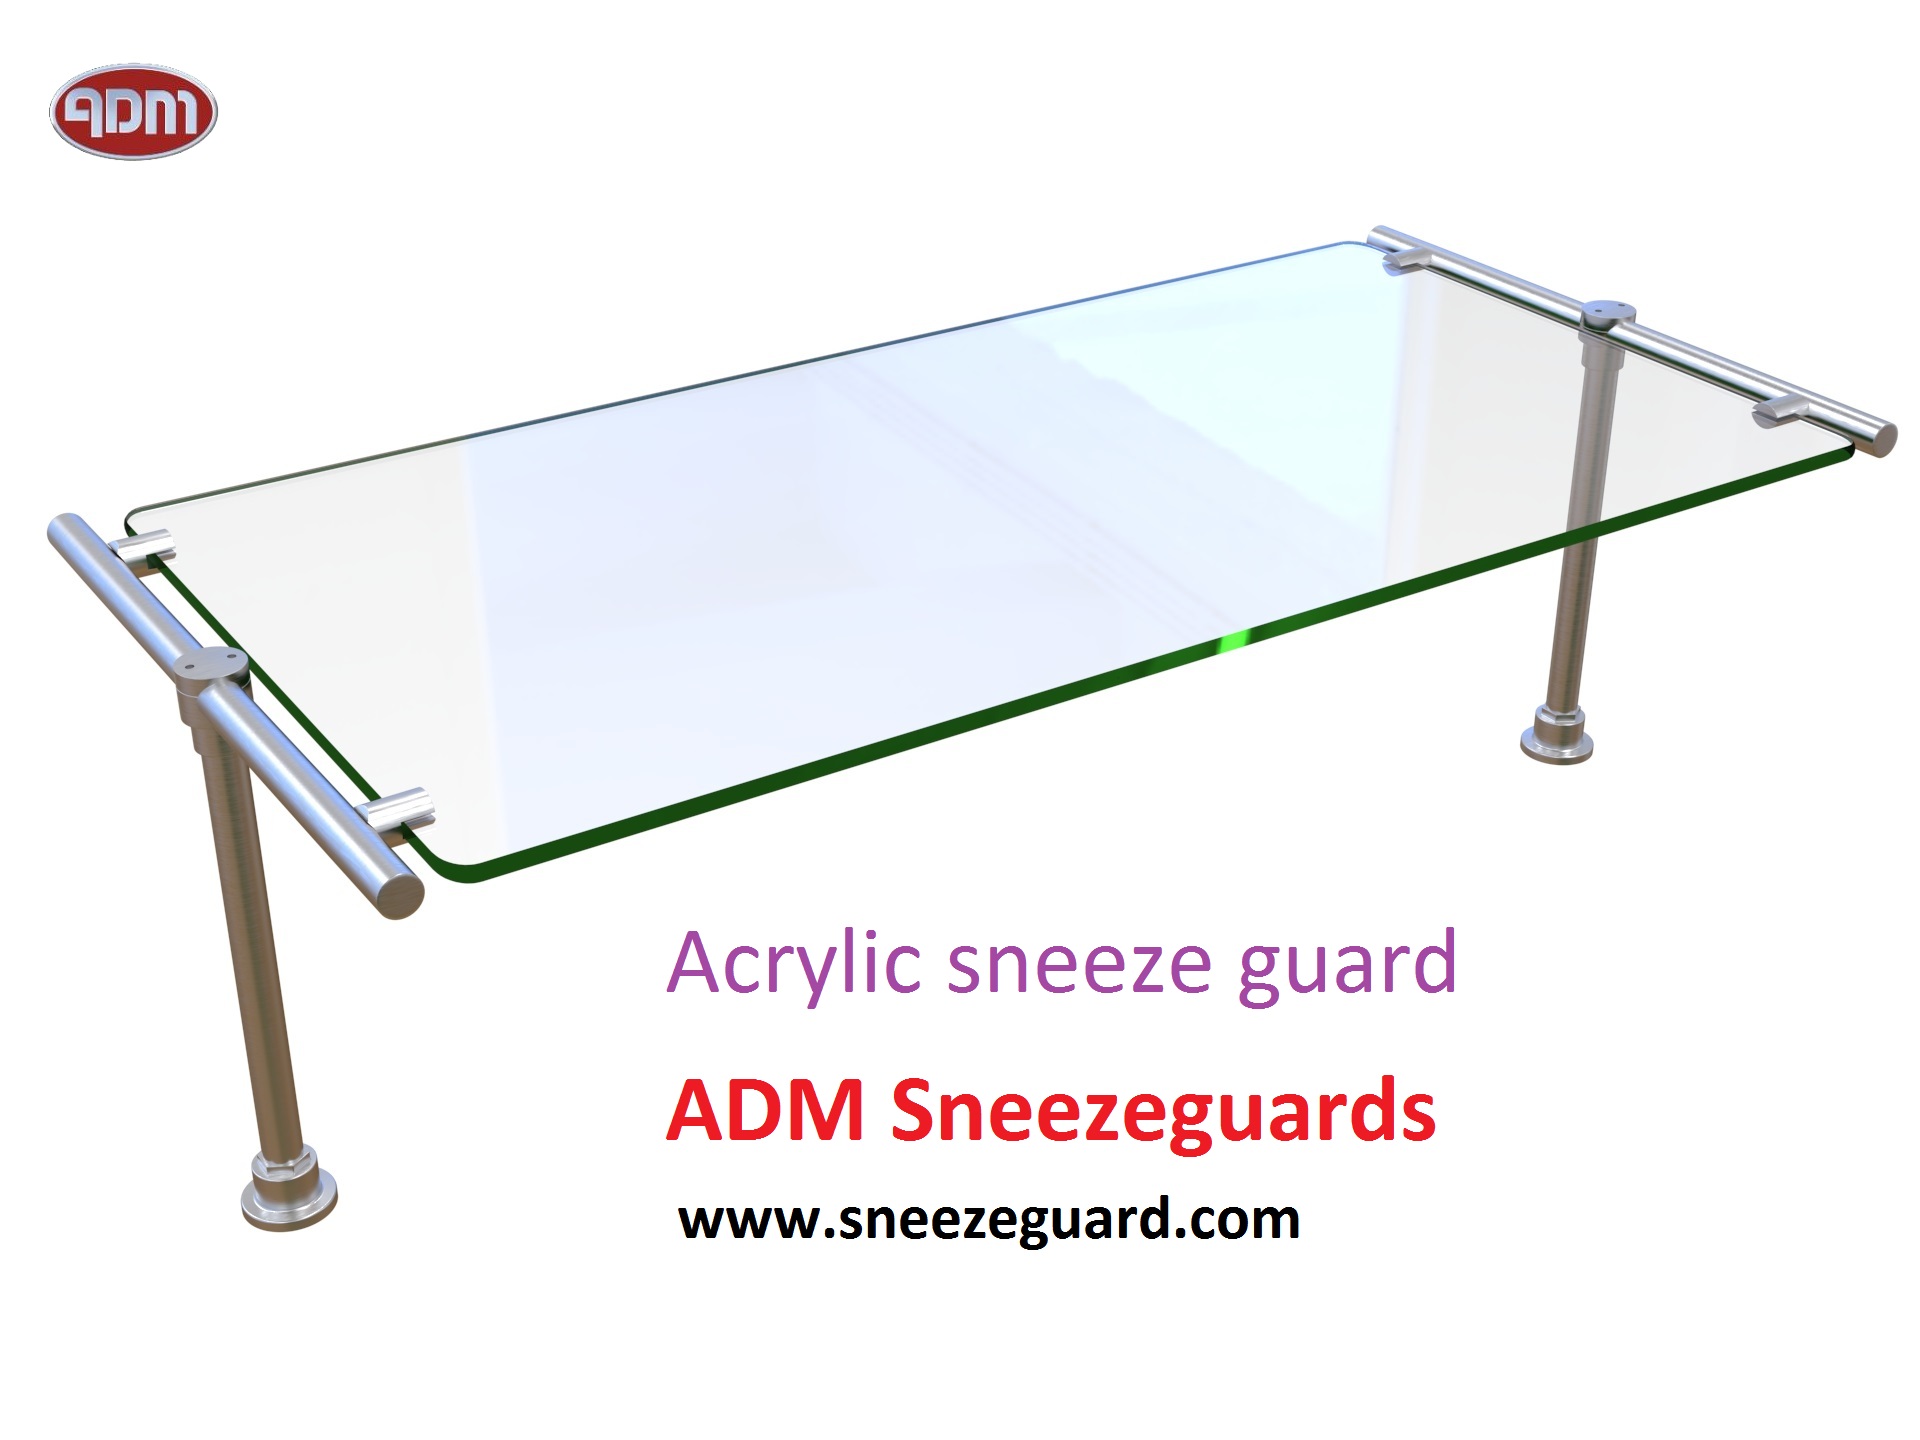  Why Restaurants Should Install Sneeze Guards| ADM